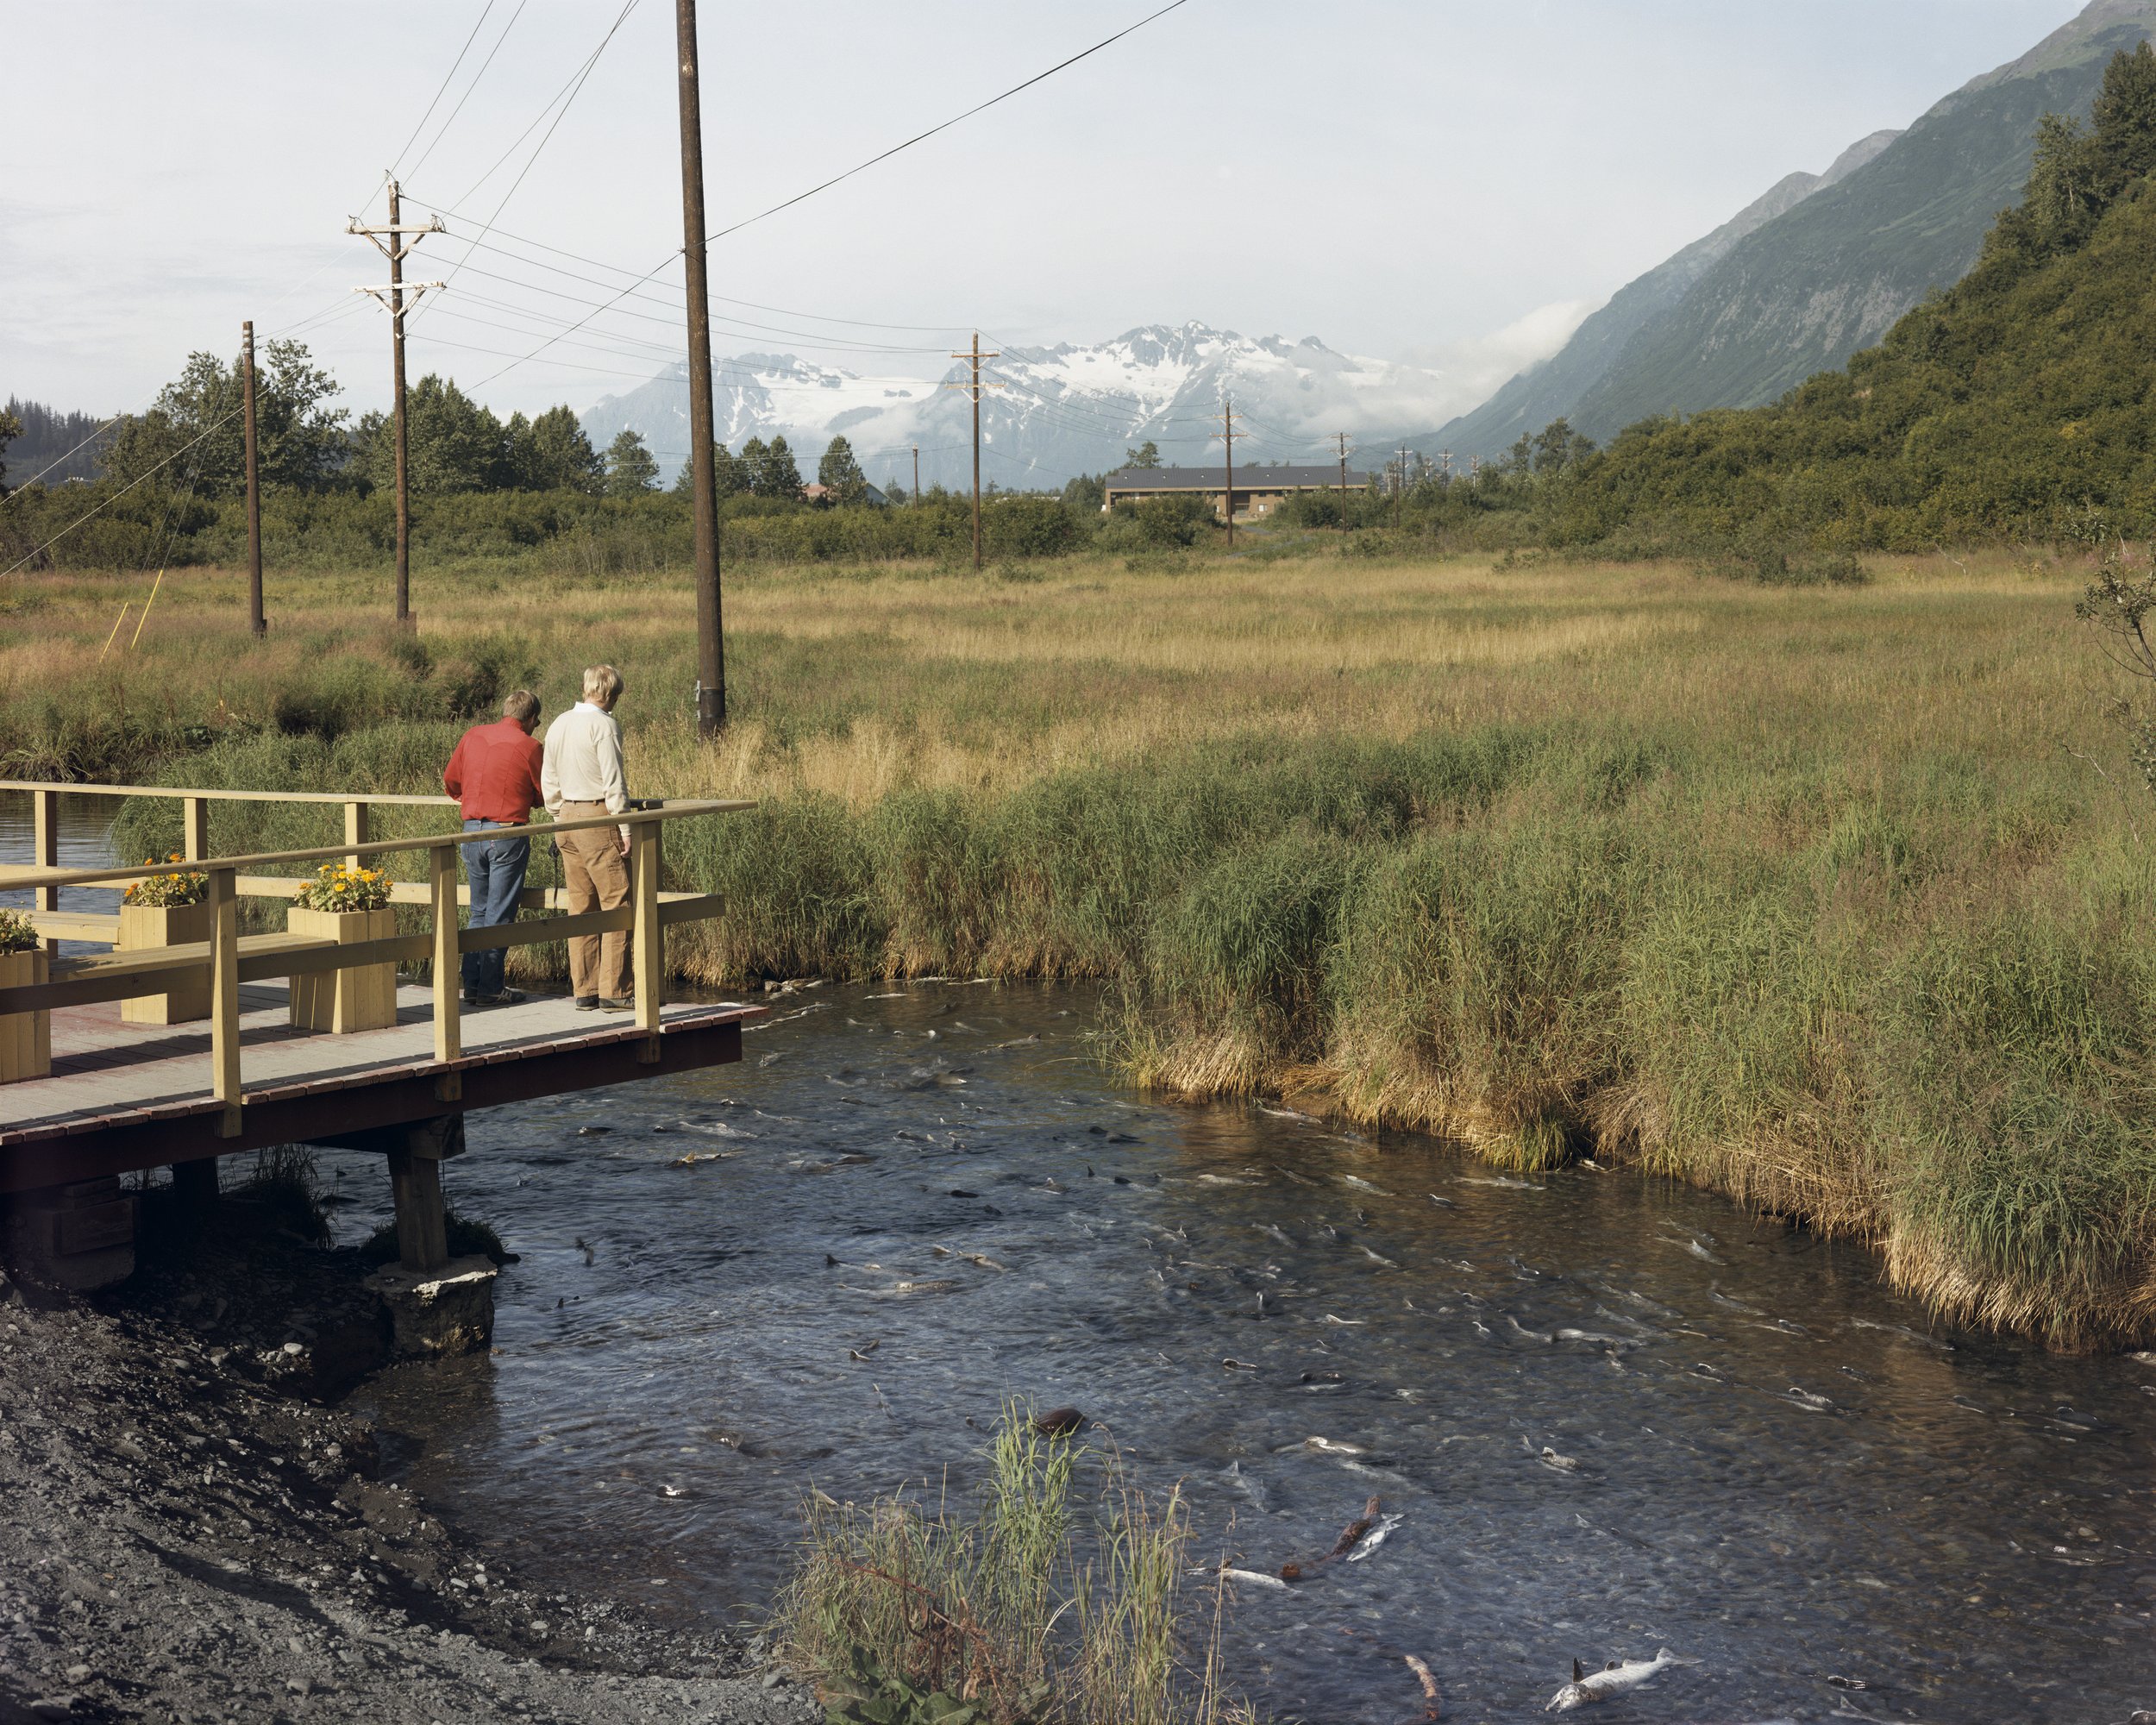 An Observation Deck for Viewing Spawning Salmon, Williwaw Creek, Alaska, August 1984 